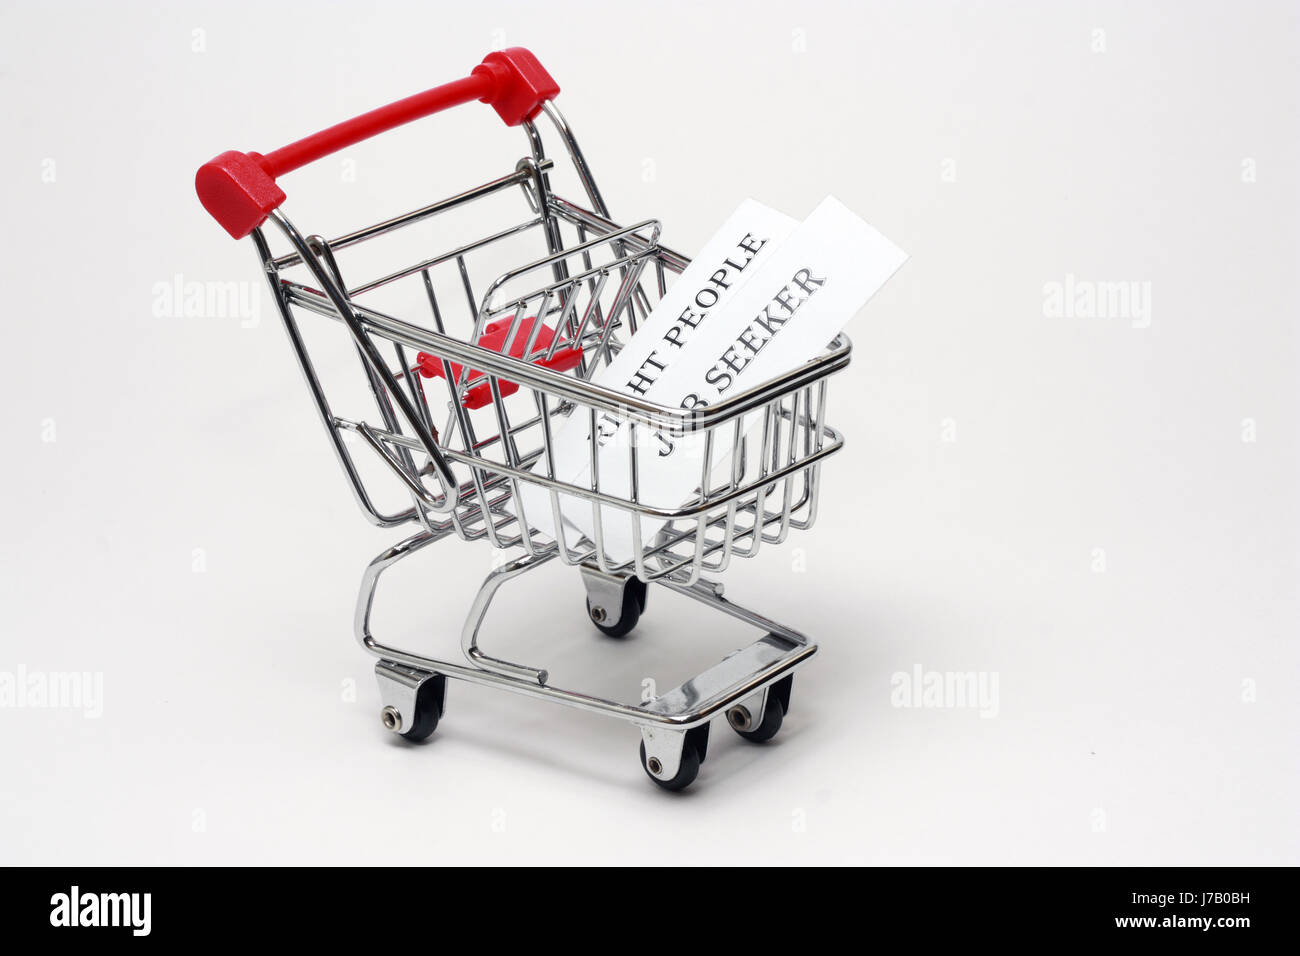 Employee in search of a right candidate in the market for his company. He is out with the shopping cart and picking up the right candidates. Stock Photo